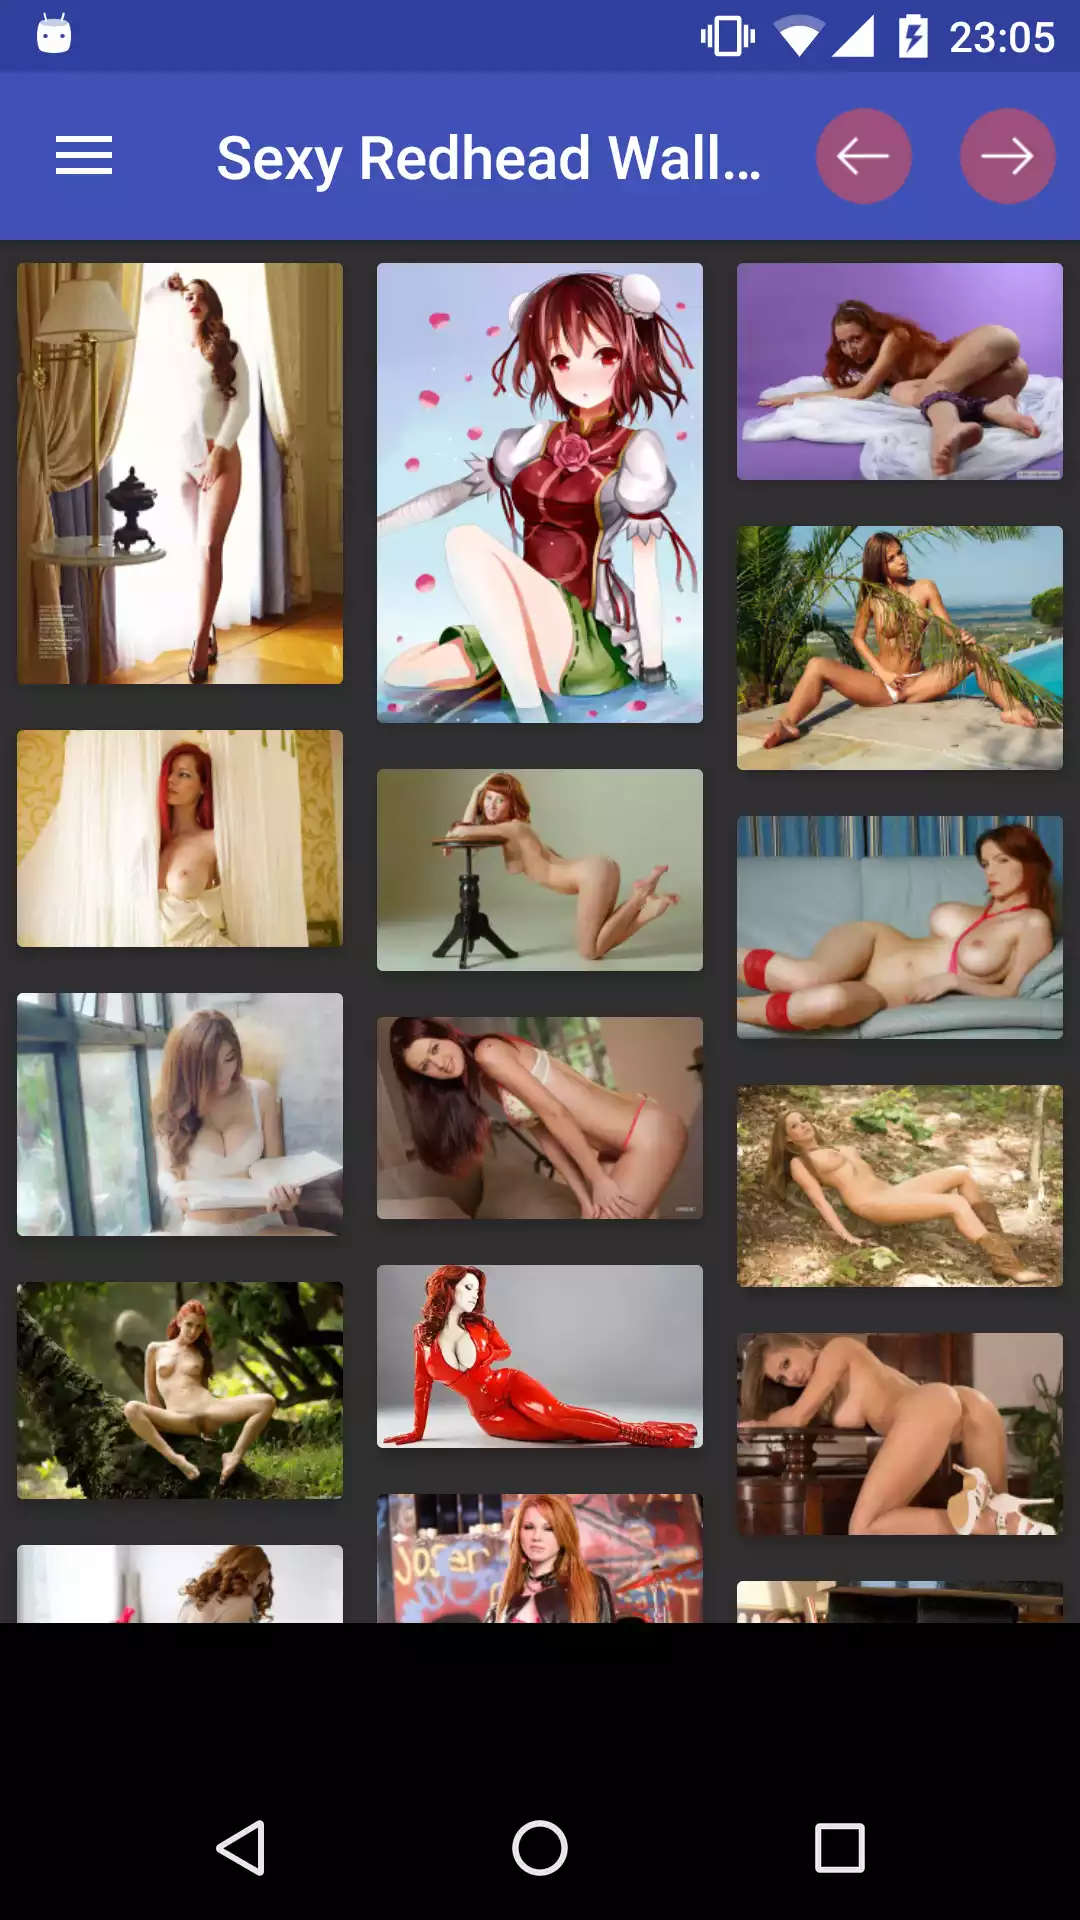 Sexy Redhead wallpapers apps,erotic,pornstar,sexy,ster,porn,redhead,amateur,pics,mobile,ios,apk,wallpapers,black,hentie,download,photo,app,mature,hentai,pornstars,hot,pictures,backgrounds